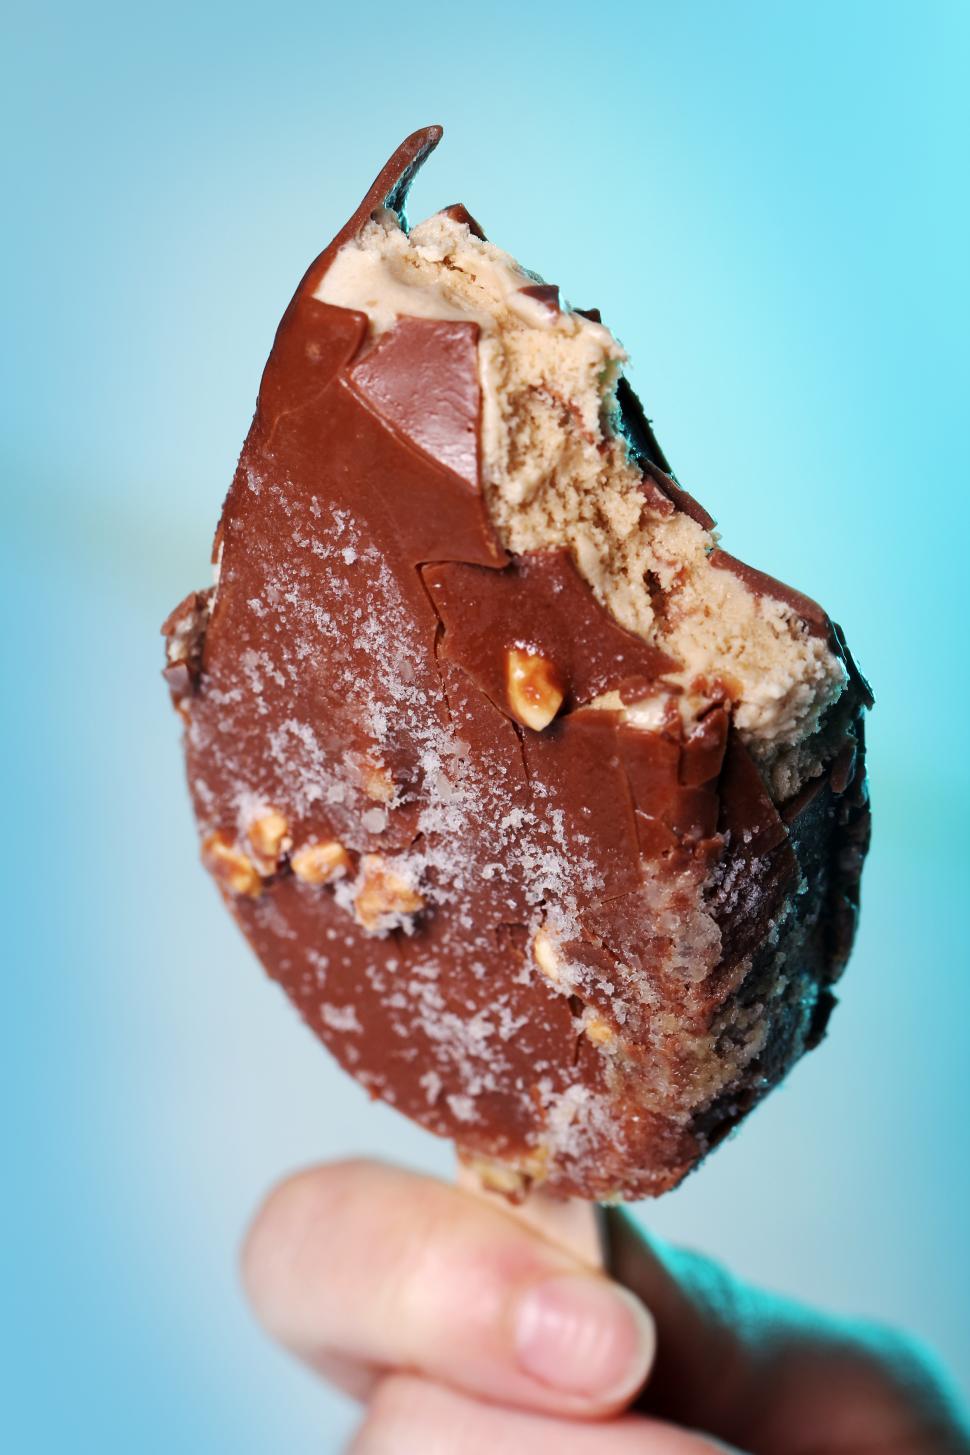 Free Image of Most of a chocolate ice cream dipped in chocolate  